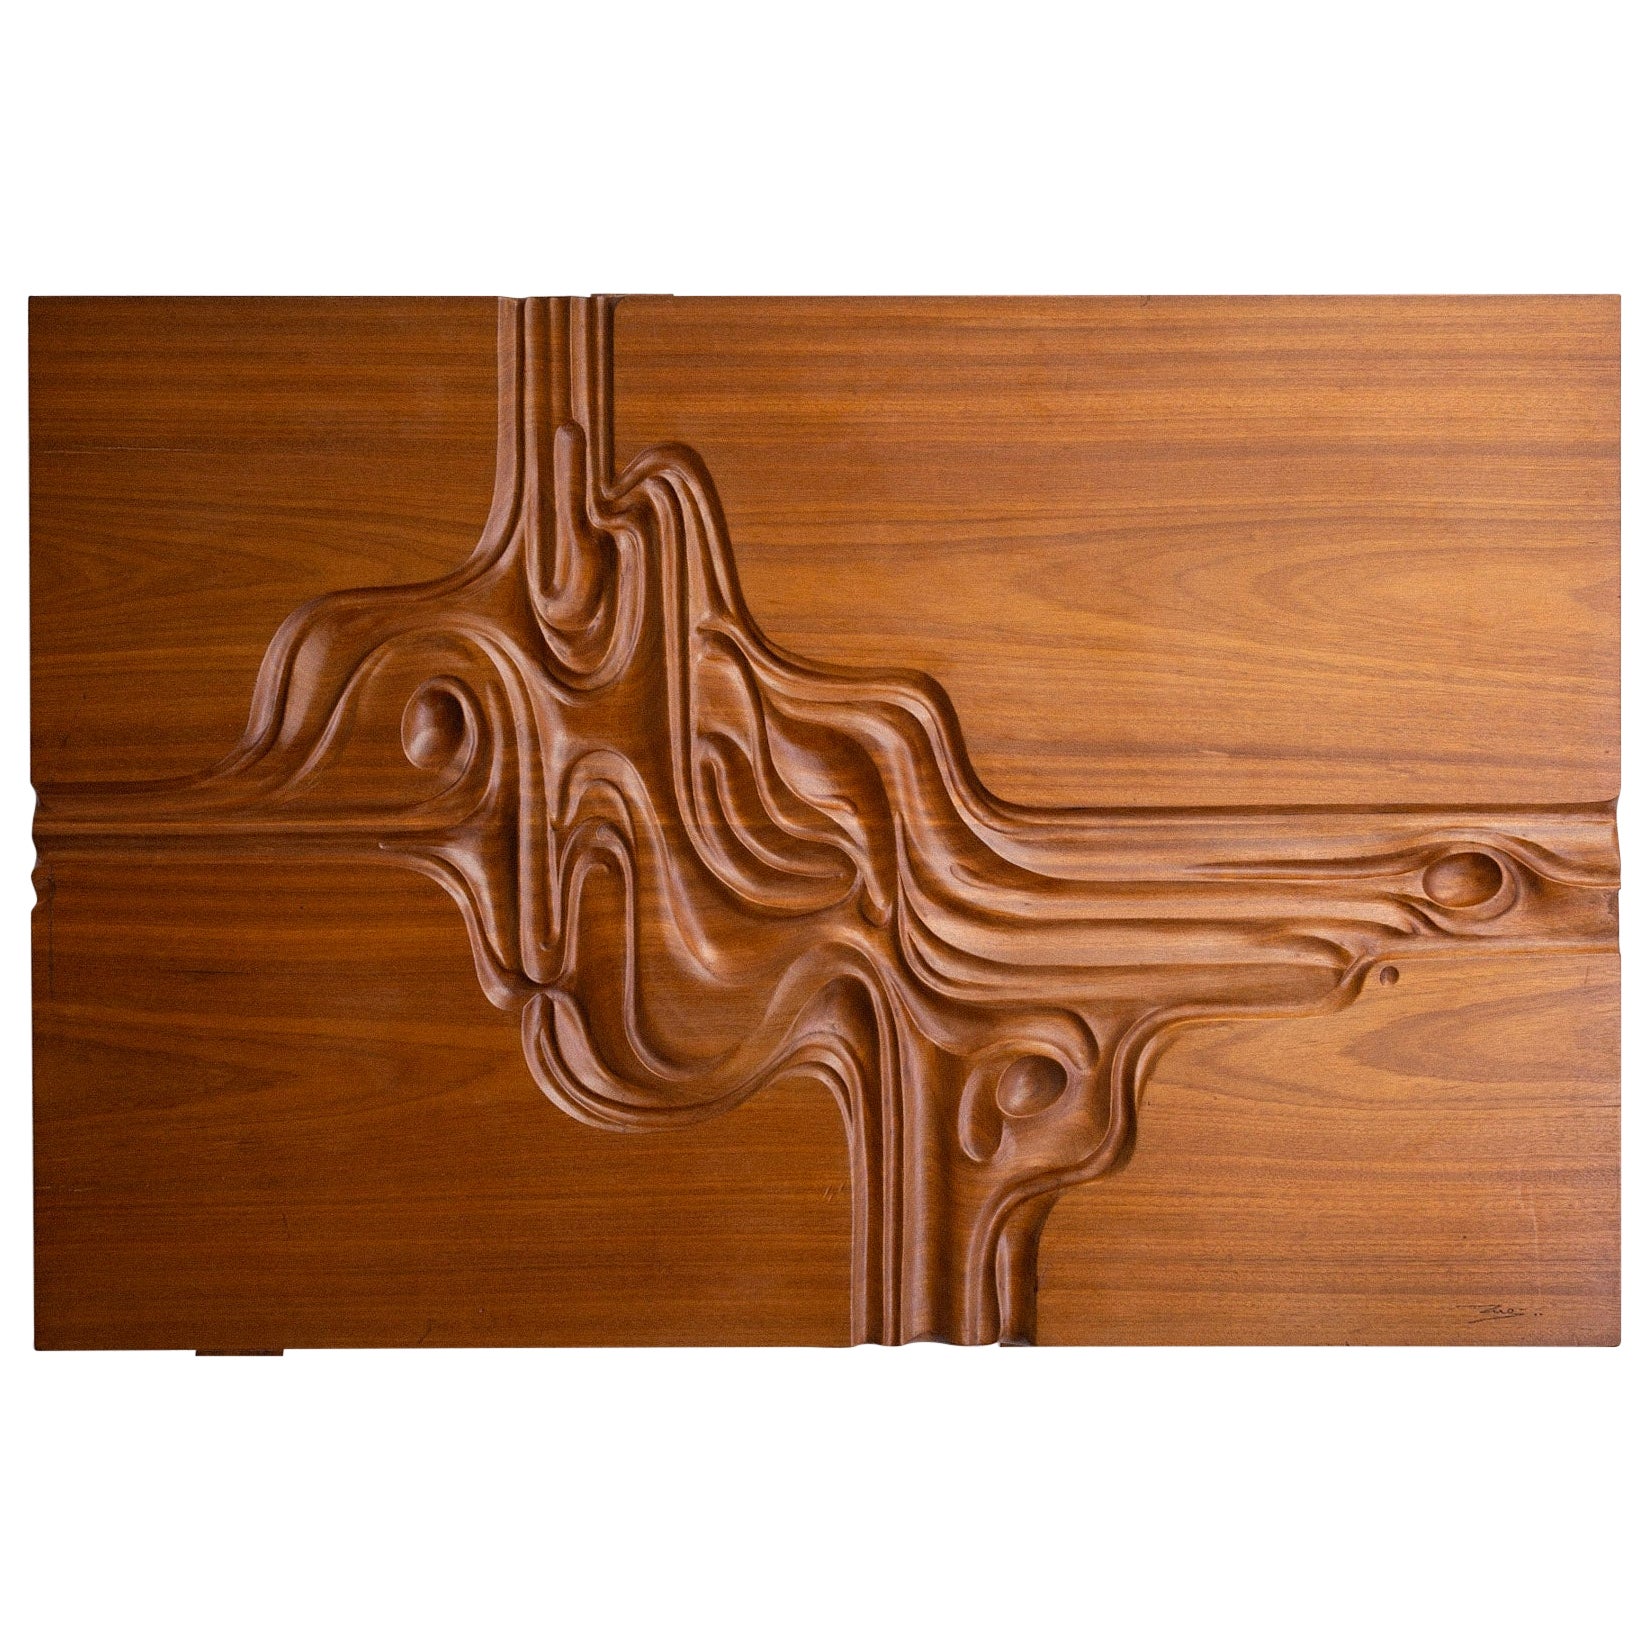 Midcentury Carved Wood Abstract Art Panel